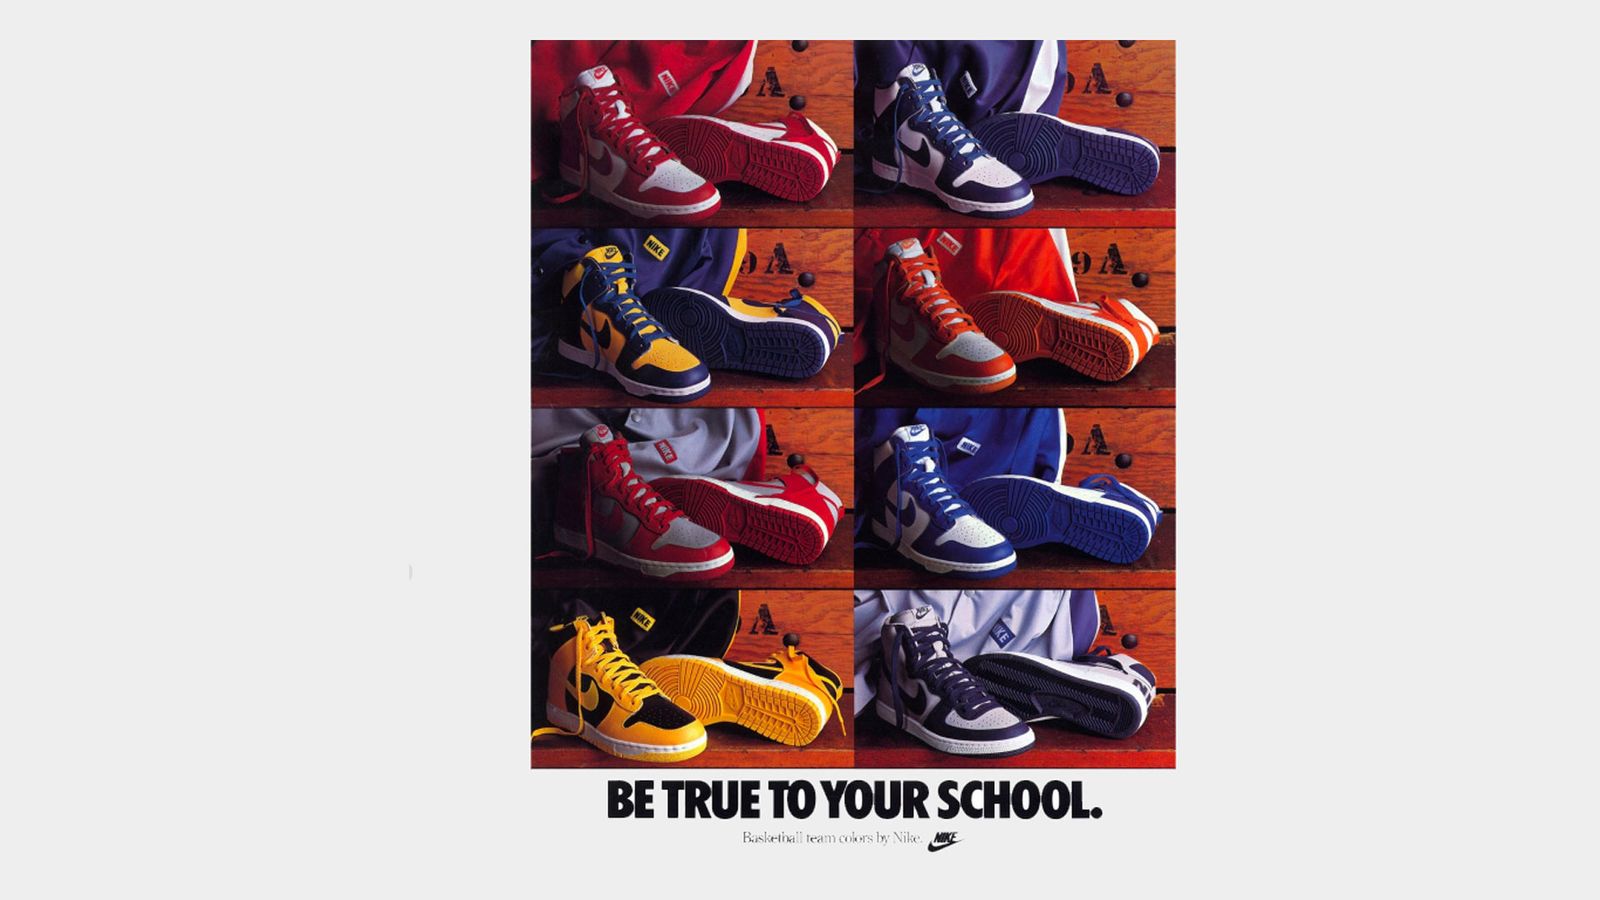 Nike Dunk poster of 8 college-themed high-top sneakers dressed in colours like blue, red, yellow, and so on.